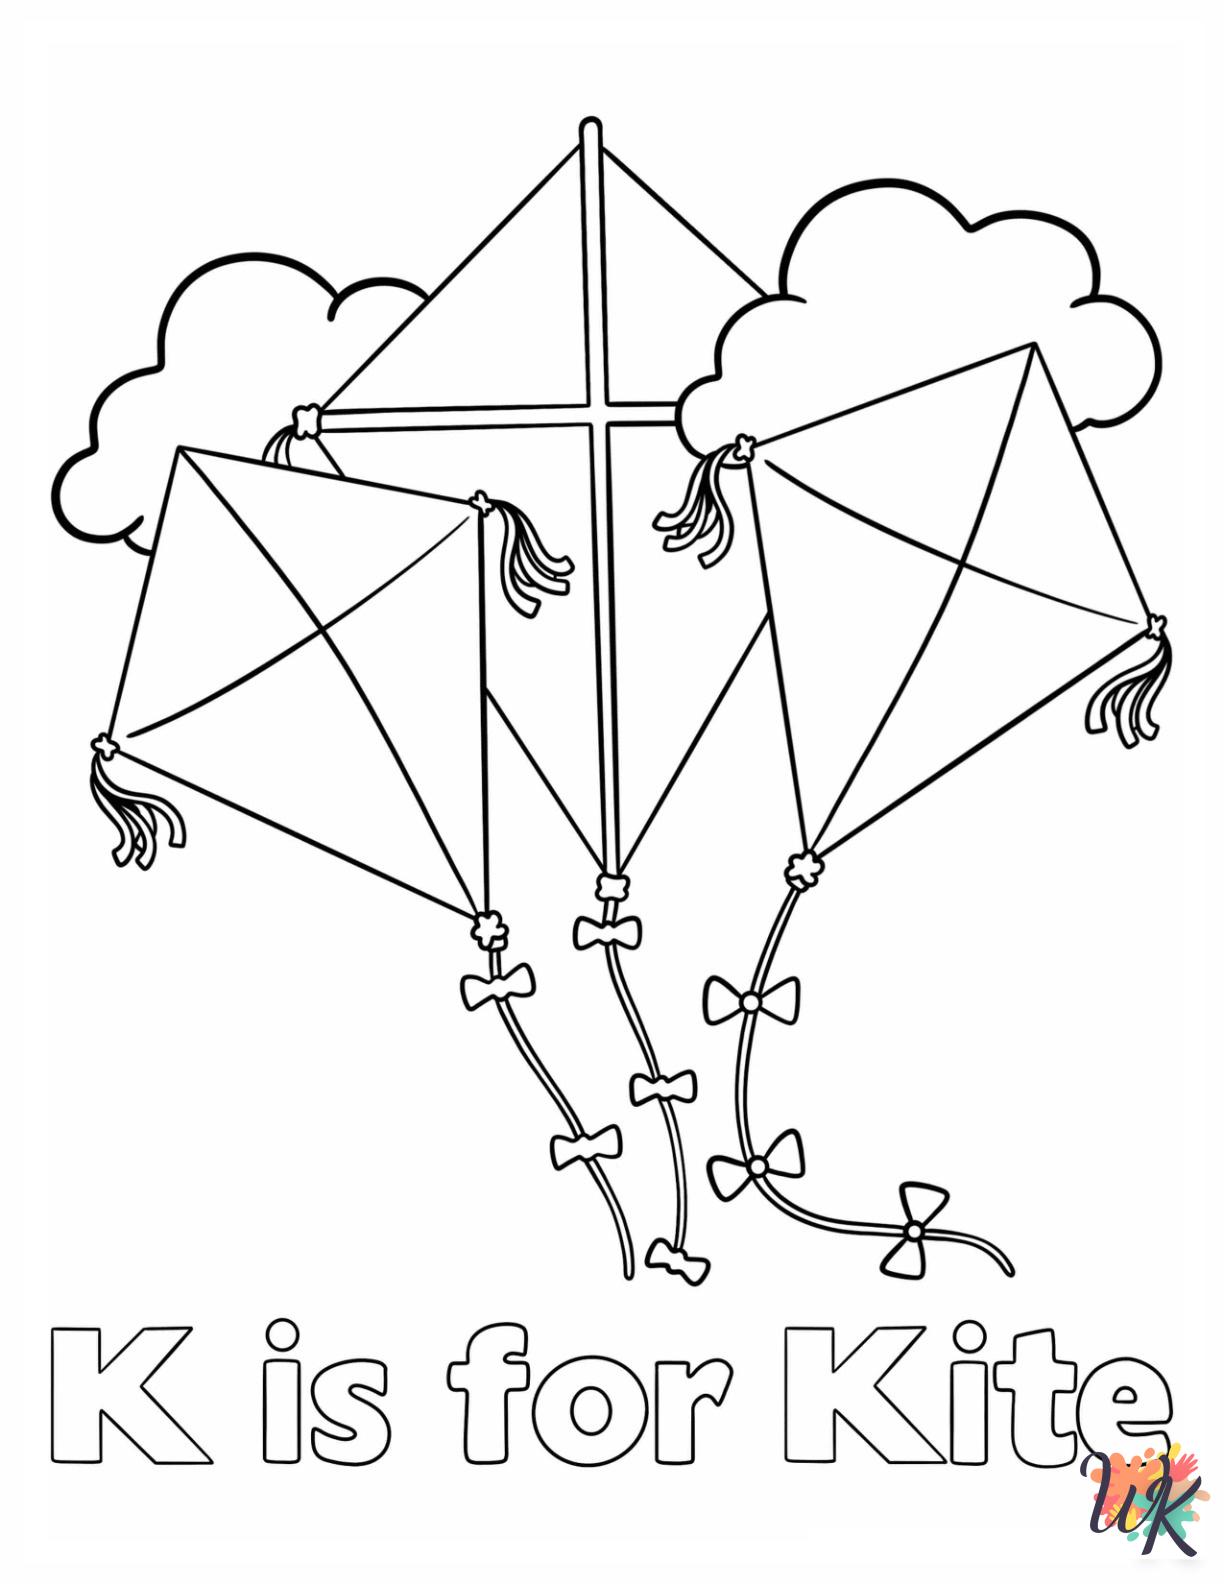 Kite coloring pages free 1